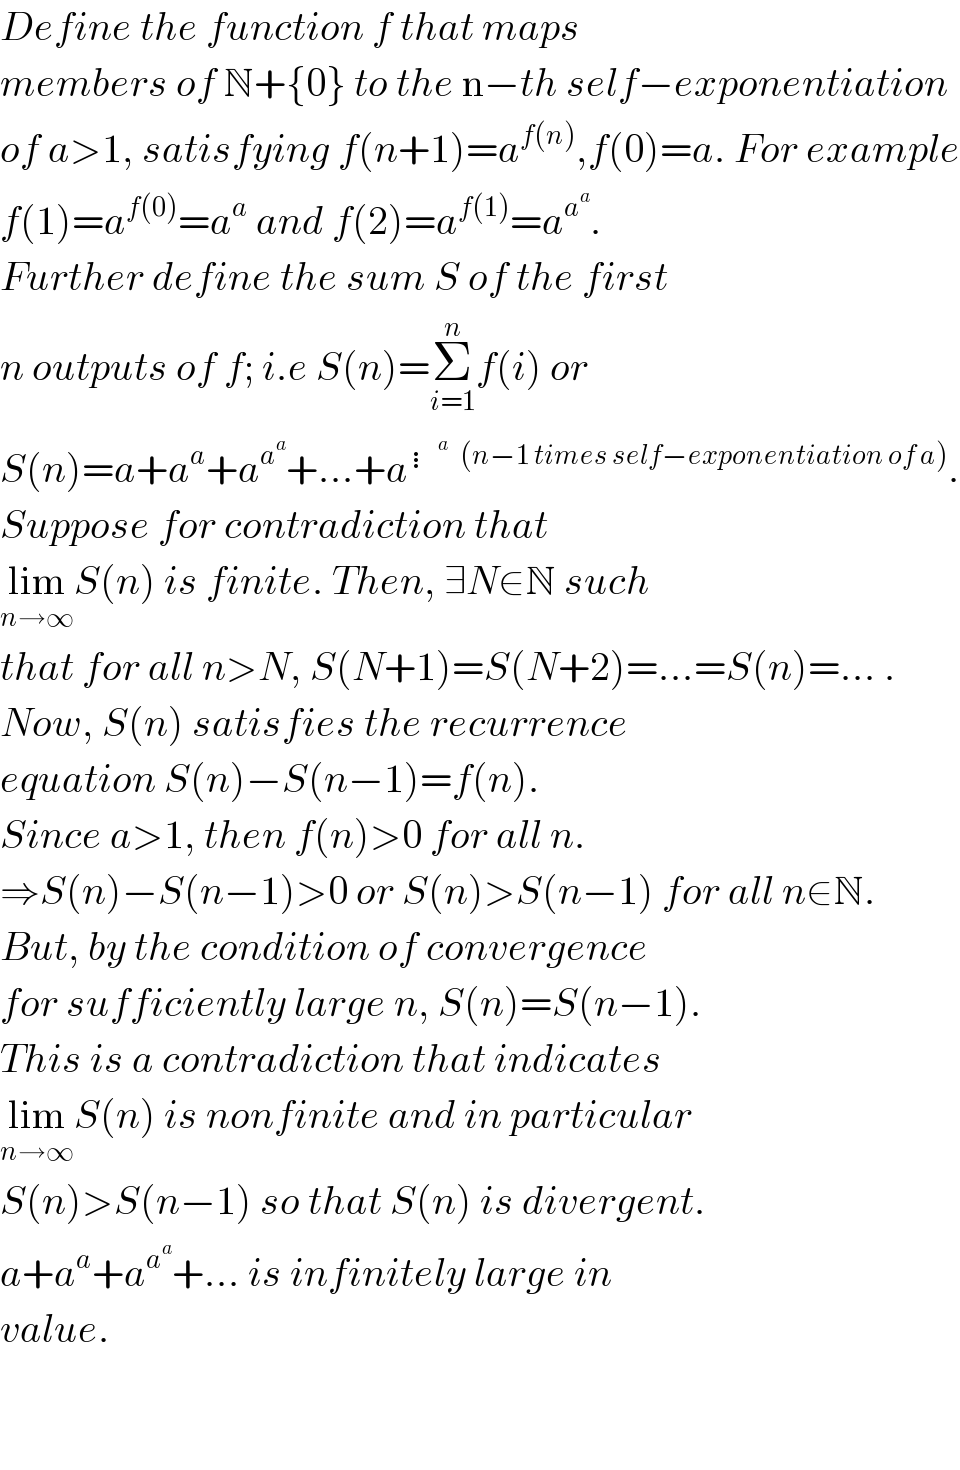 Define the function f that maps   members of N+{0} to the n−th self−exponentiation  of a>1, satisfying f(n+1)=a^(f(n)) ,f(0)=a. For example  f(1)=a^(f(0)) =a^a  and f(2)=a^(f(1)) =a^a^a  .  Further define the sum S of the first  n outputs of f; i.e S(n)=Σ_(i=1) ^n f(i) or  S(n)=a+a^a +a^a^a  +...+a^(⋮^a    (n−1 times self−exponentiation of a)) .  Suppose for contradiction that   lim_(n→∞) S(n) is finite. Then, ∃N∈N such  that for all n>N, S(N+1)=S(N+2)=...=S(n)=... .  Now, S(n) satisfies the recurrence  equation S(n)−S(n−1)=f(n).  Since a>1, then f(n)>0 for all n.  ⇒S(n)−S(n−1)>0 or S(n)>S(n−1) for all n∈N.  But, by the condition of convergence  for sufficiently large n, S(n)=S(n−1).  This is a contradiction that indicates  lim_(n→∞) S(n) is nonfinite and in particular  S(n)>S(n−1) so that S(n) is divergent.  a+a^a +a^a^a  +... is infinitely large in  value.       